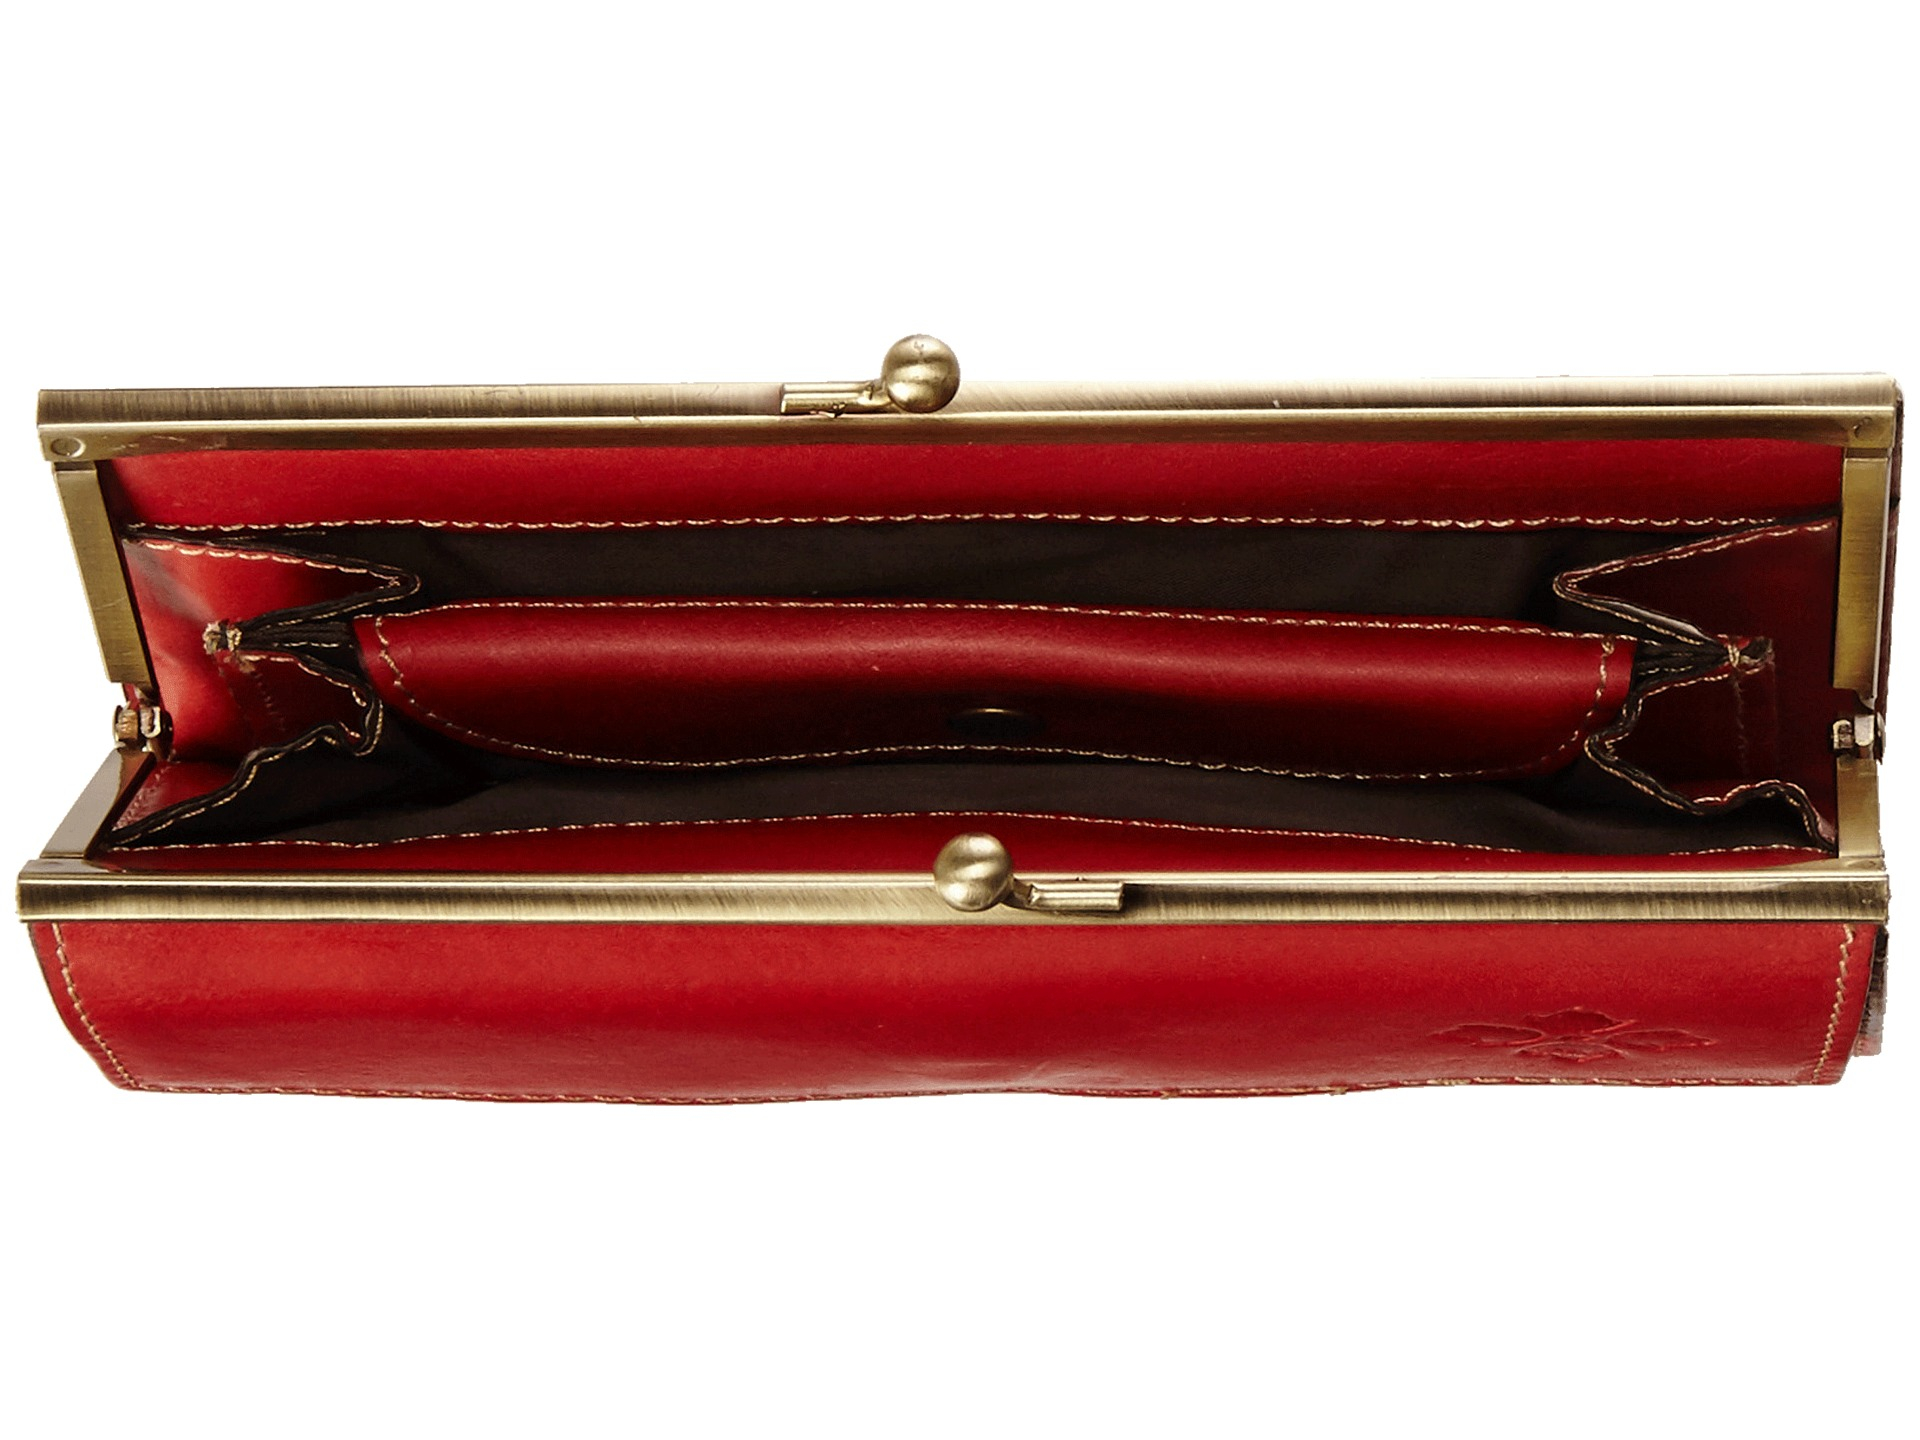 Patricia nash Dacia Frame Wallet in Red | Lyst